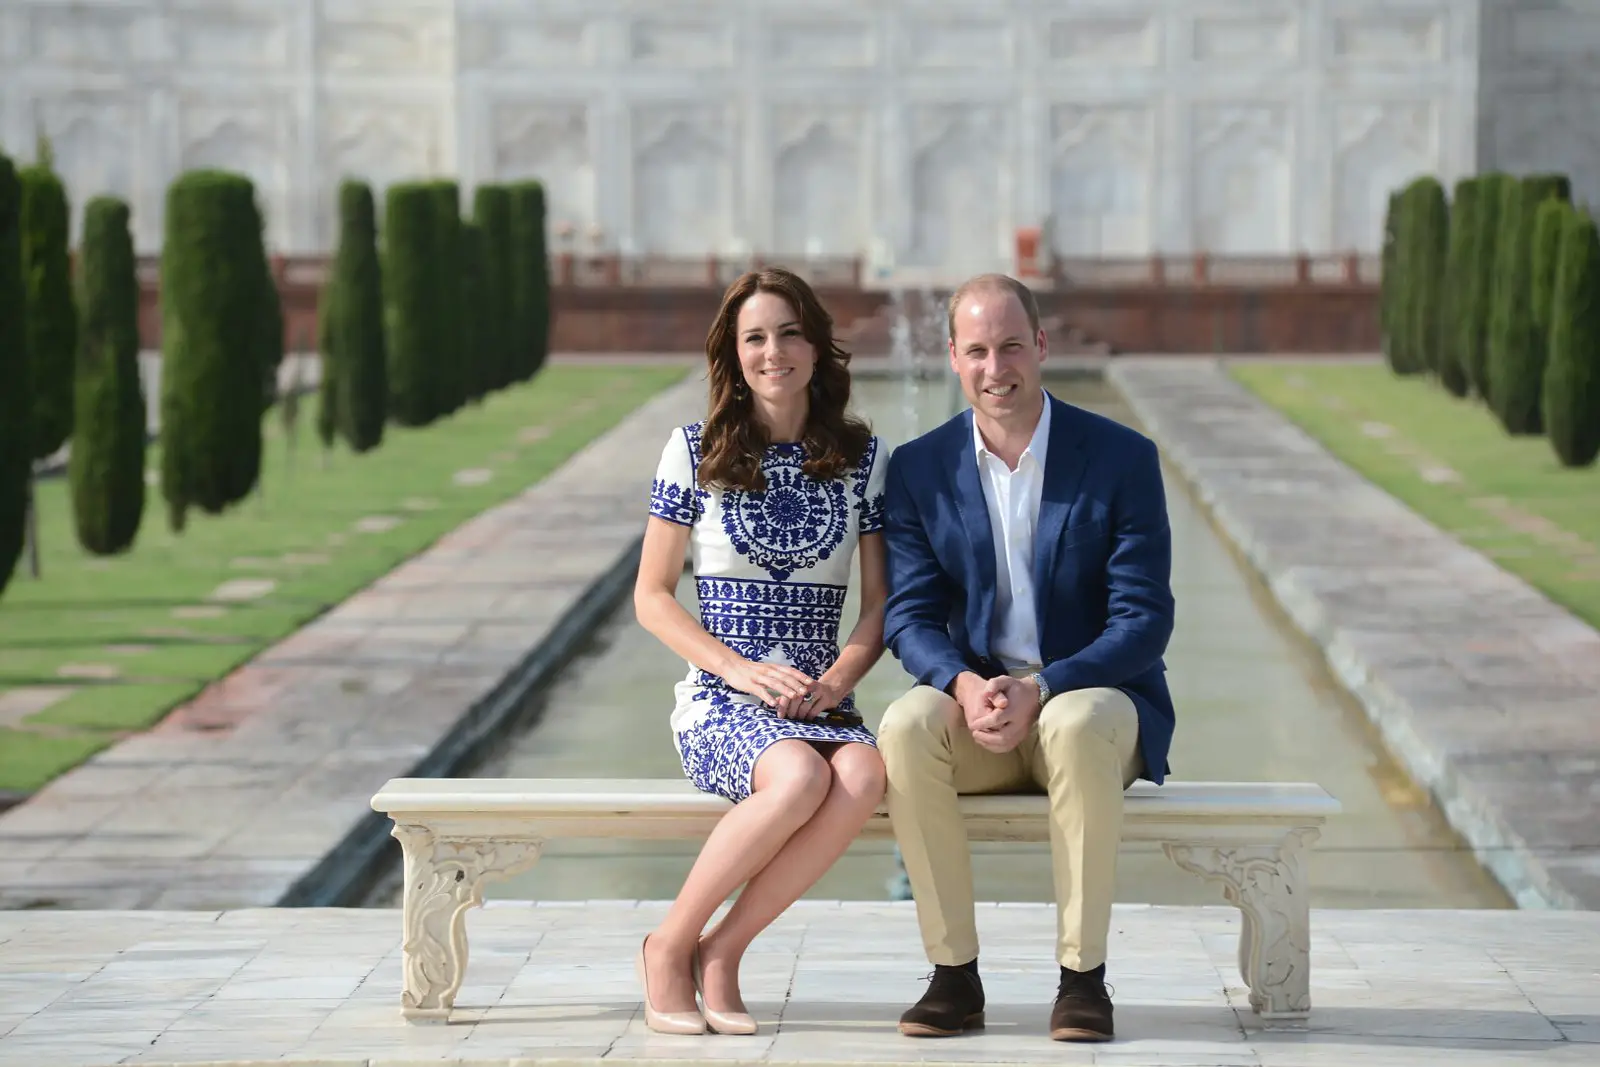 The Duke and Duchess made the final decision in the morning that they would sit on the bench